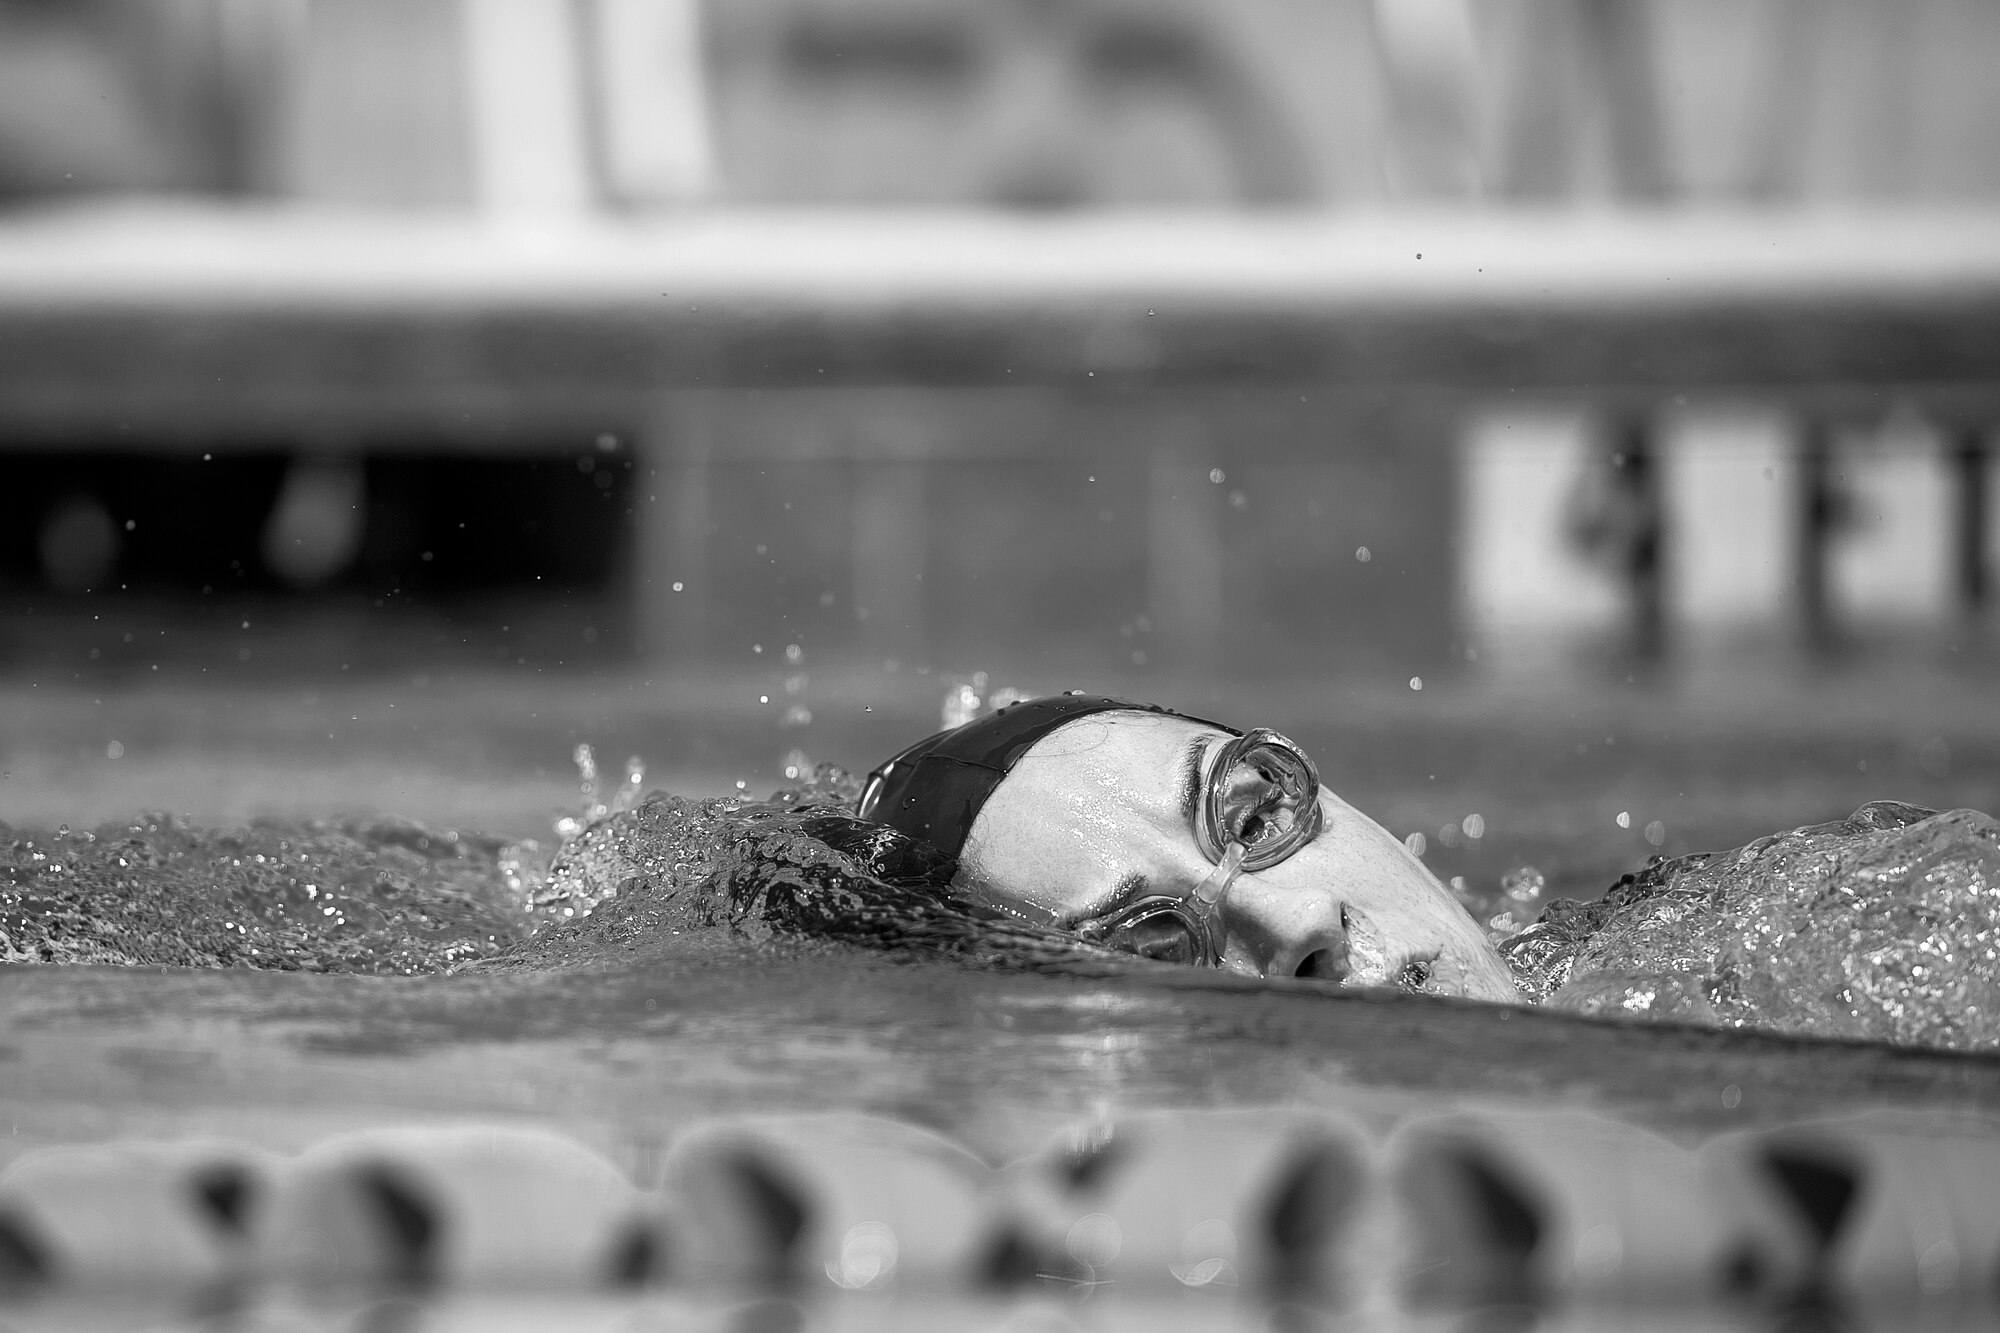 U.S. Air Force 1st Lt. Morgan K. Diglia, Sexual Assault Response Coordinator deputy, surfaces for air while swimming at the McGarr Pool on Goodfellow Air Force Base, Texas, July 24, 2015. Diglia is prepping for an olympic triathlon, which includes a 1.5km swim, 40km bike ride, and a 10km run. (U.S. Air Force photo by Staff Sgt. Michael Smith/Released)